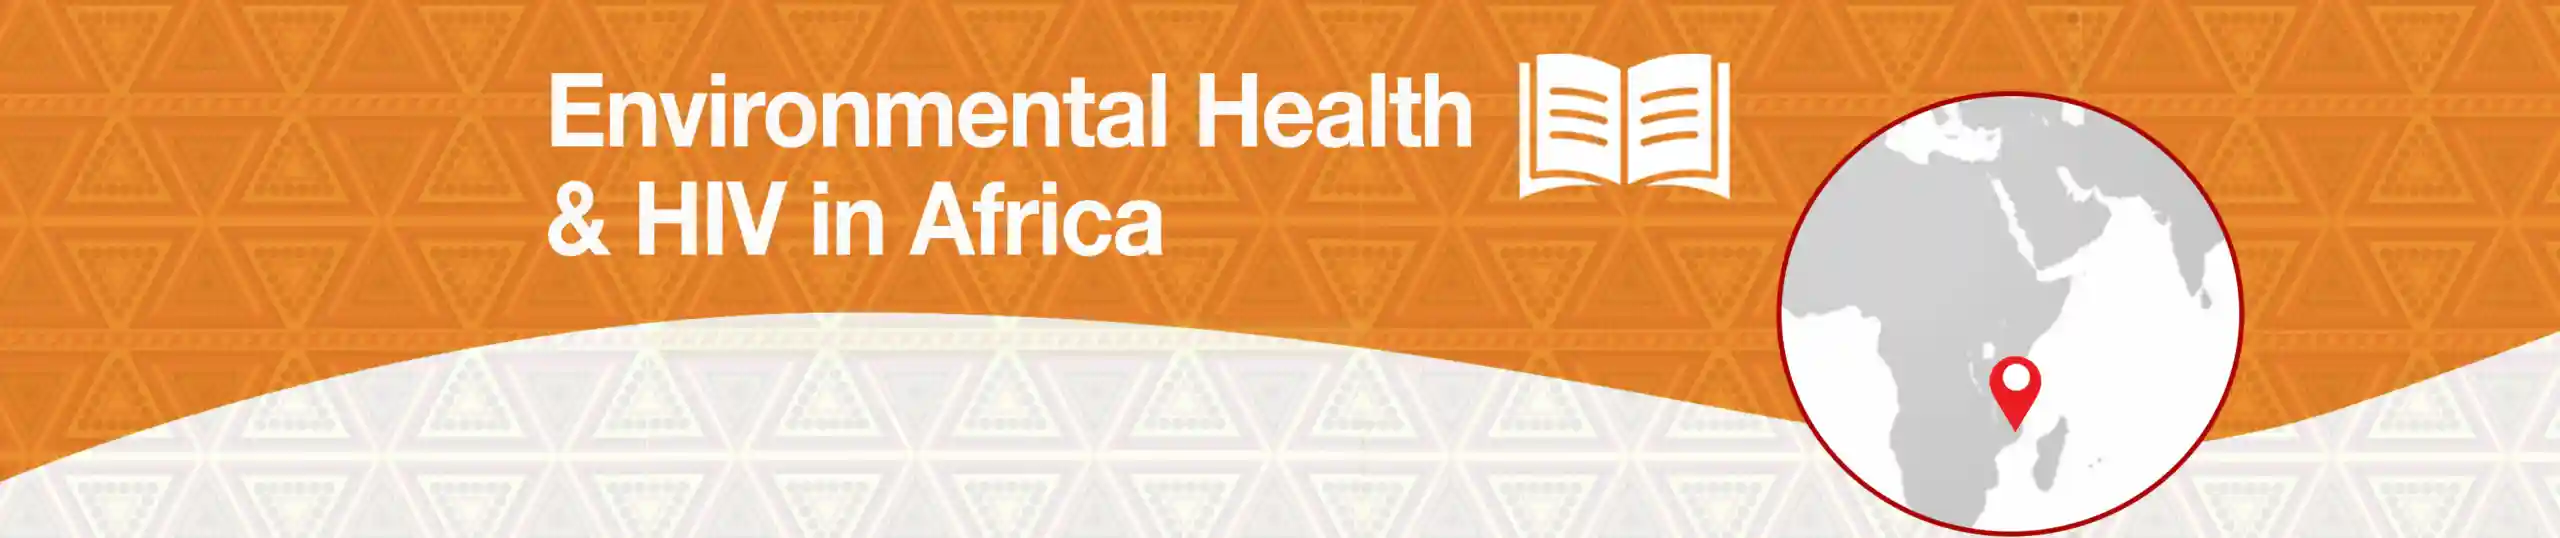 Environmental health and HIV in Africa